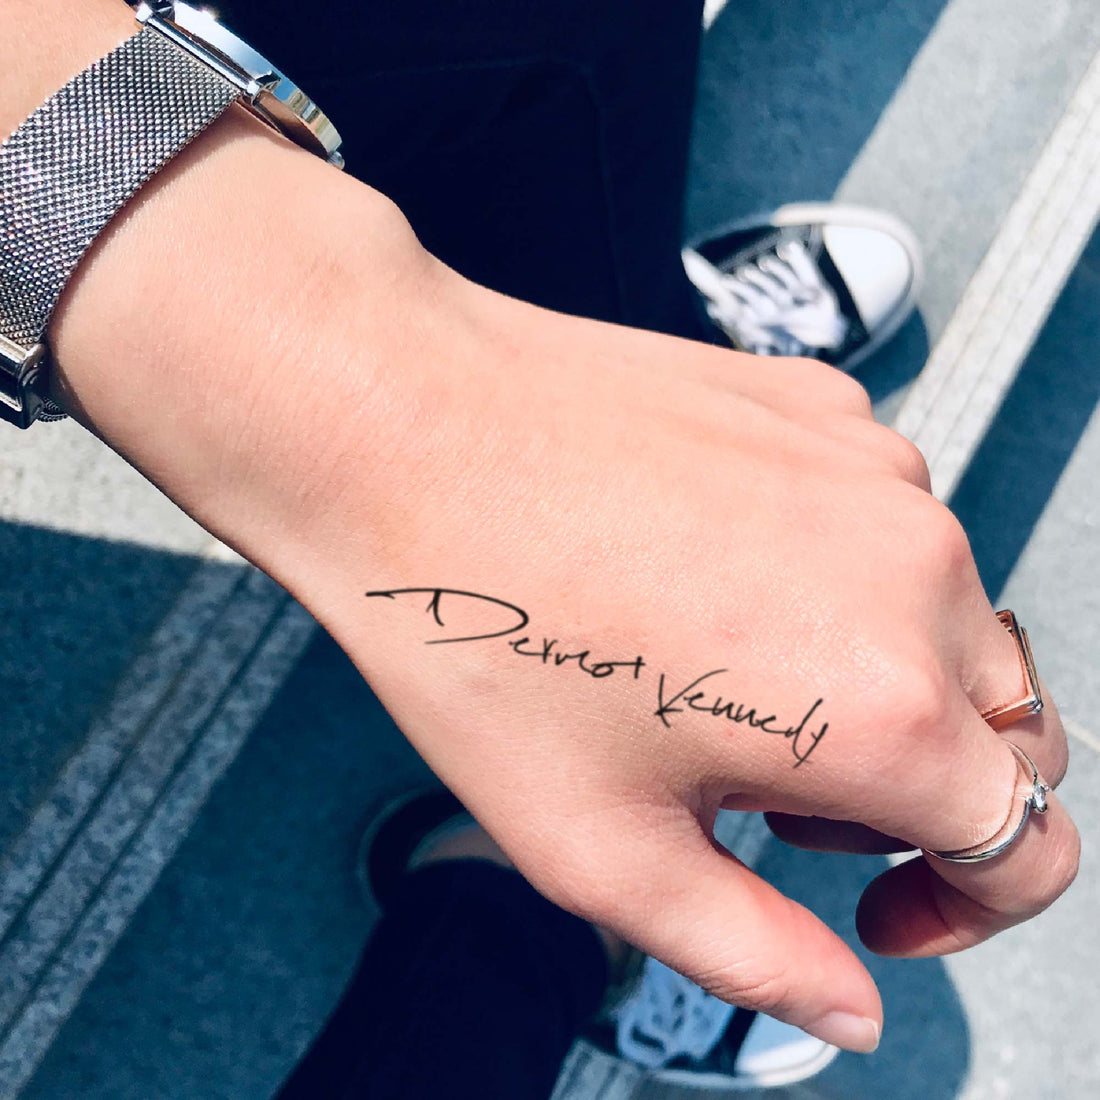 Dermot Kennedy custom temporary tattoo sticker design idea inspiration meanings removal arm wrist hand words font name signature calligraphy lyrics tour concert outfits merch accessory gift souvenir costumes wear dress up code